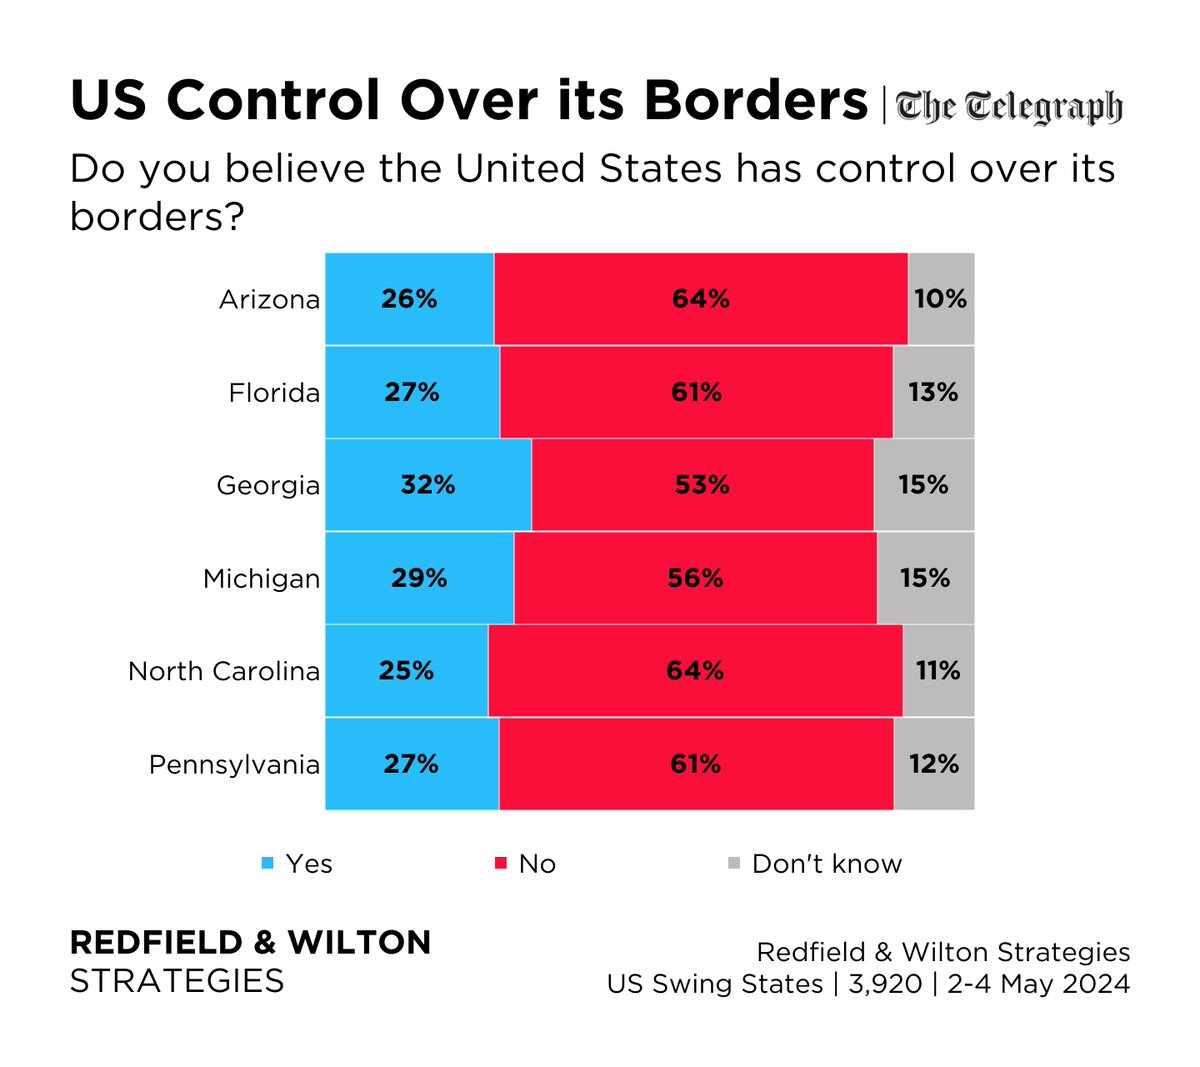 Majorities of voters in all six states polled say they do NOT believe the United States currently has control over its borders. redfieldandwiltonstrategies.com/latest-us-swin…